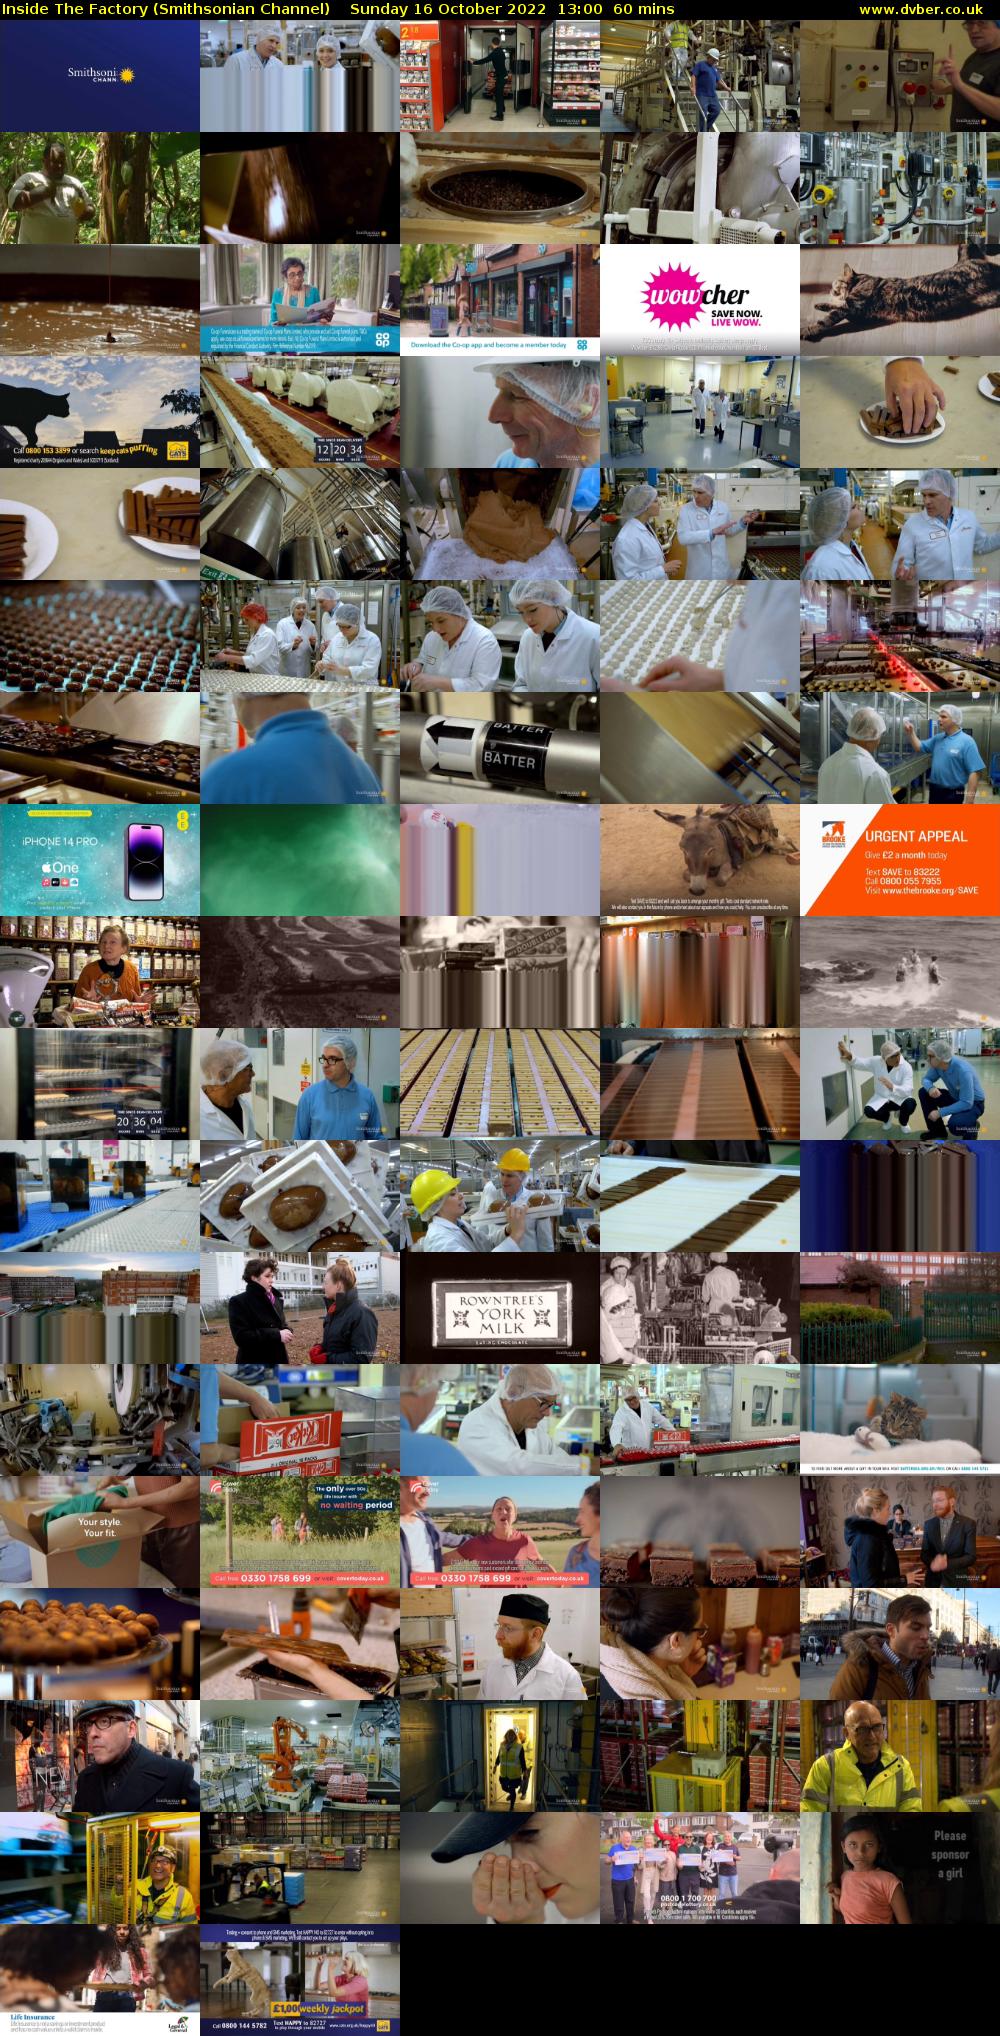 Inside The Factory (Smithsonian Channel) Sunday 16 October 2022 13:00 - 14:00